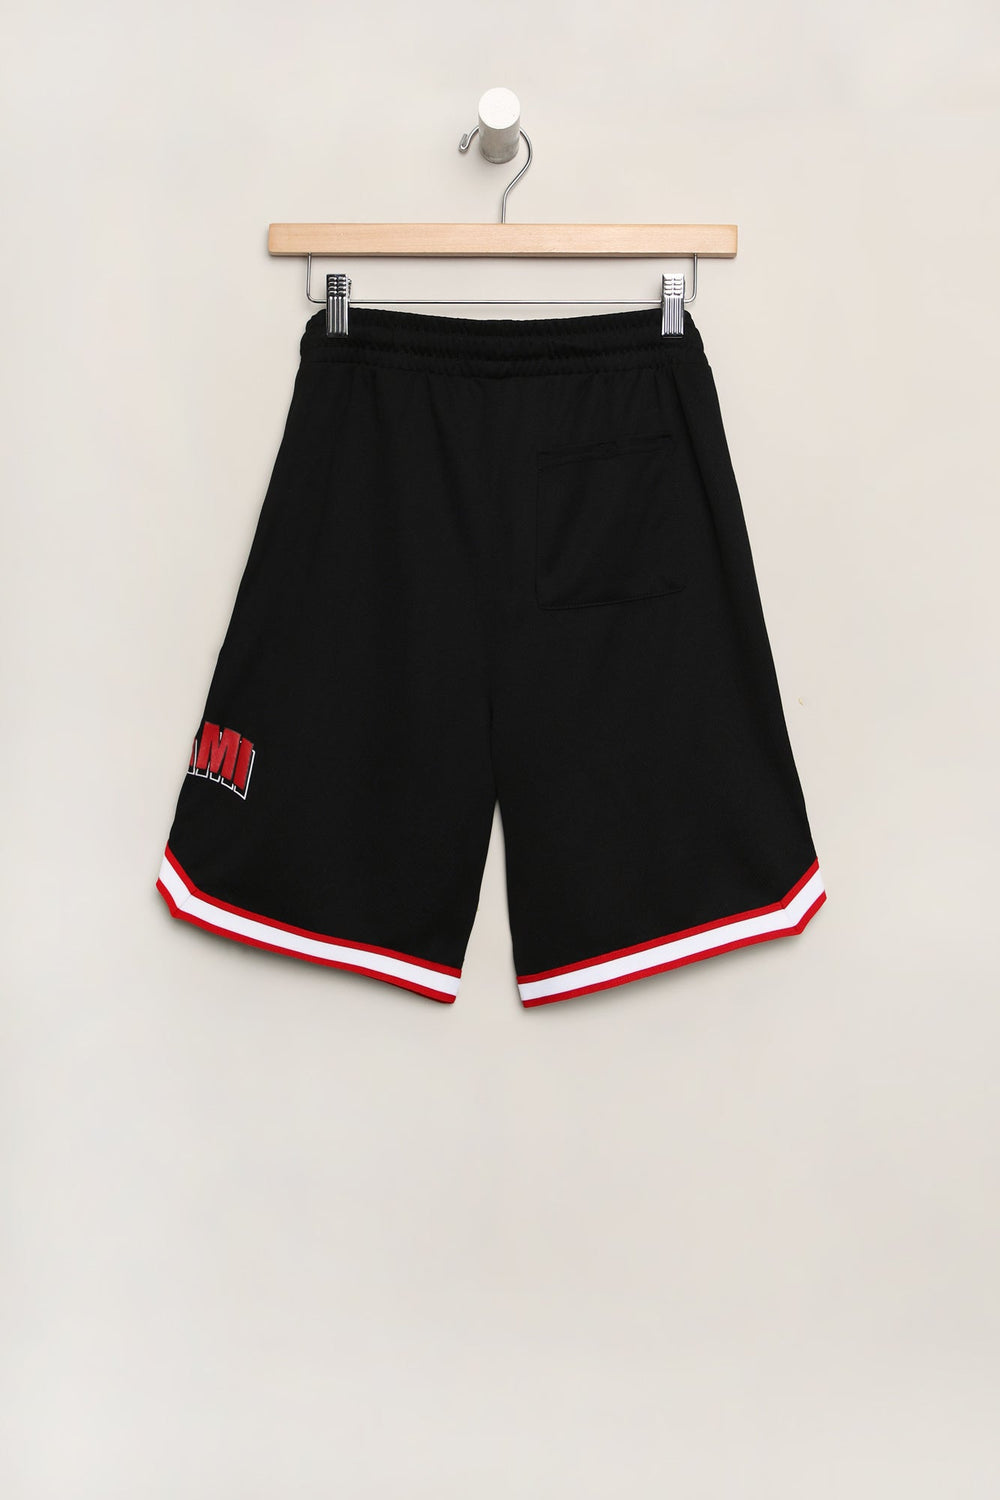 West49 Youth Miami Mesh Shorts West49 Youth Miami Mesh Shorts